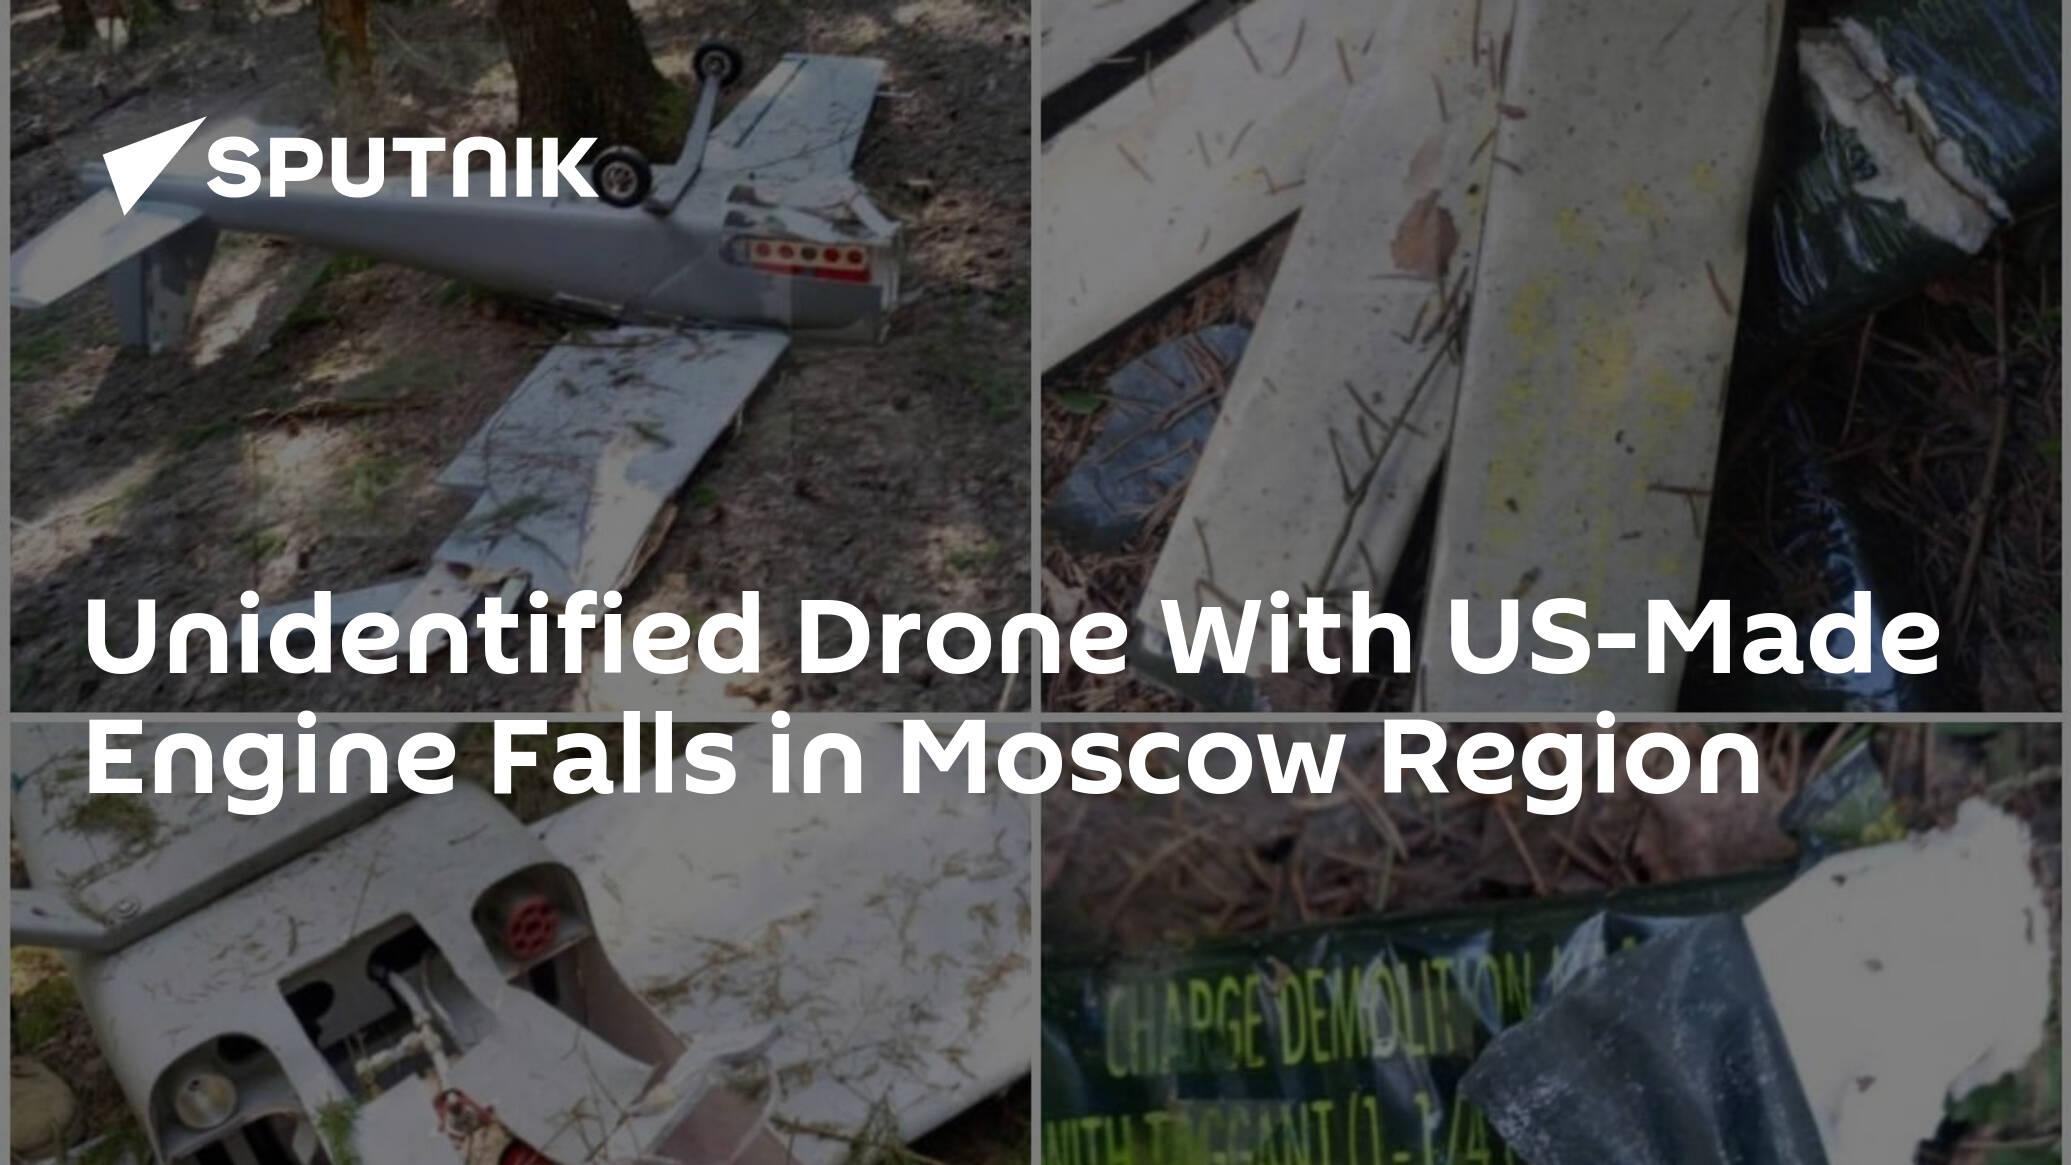 Unidentified Drone With US-Made Engine Falls in Moscow Region